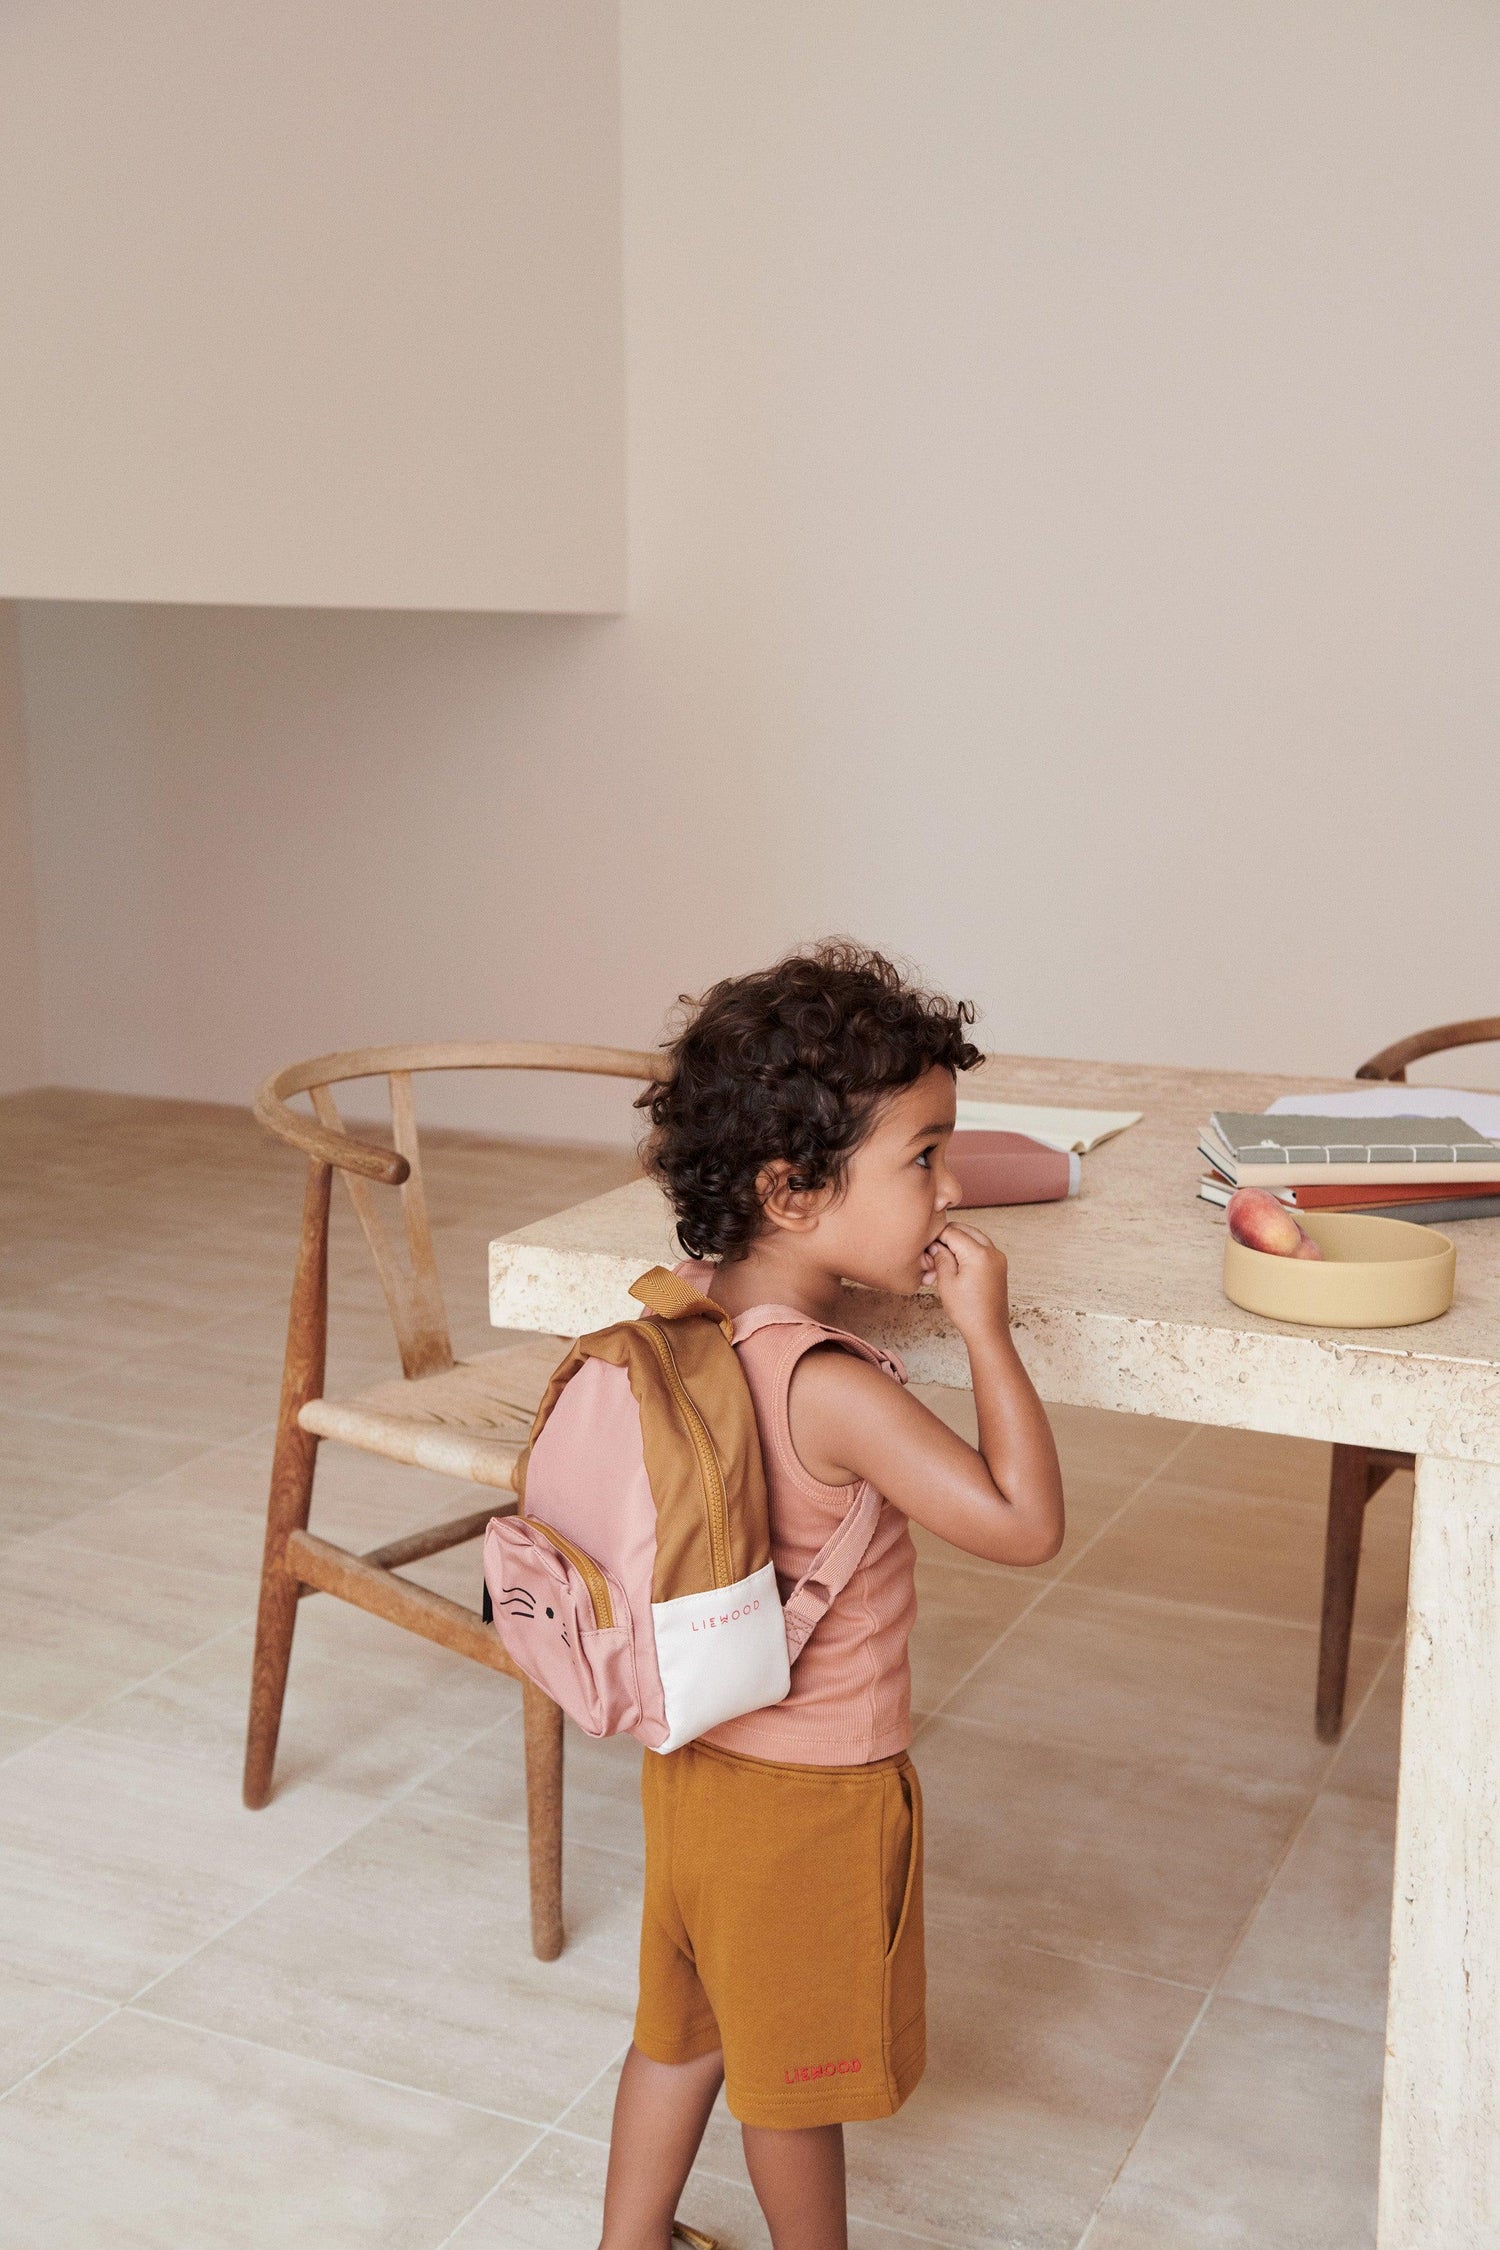 Mini-Rucksack Saxo Cat 'Tuscany Rose Mix' - The Little One • Family.Concept.Store. 